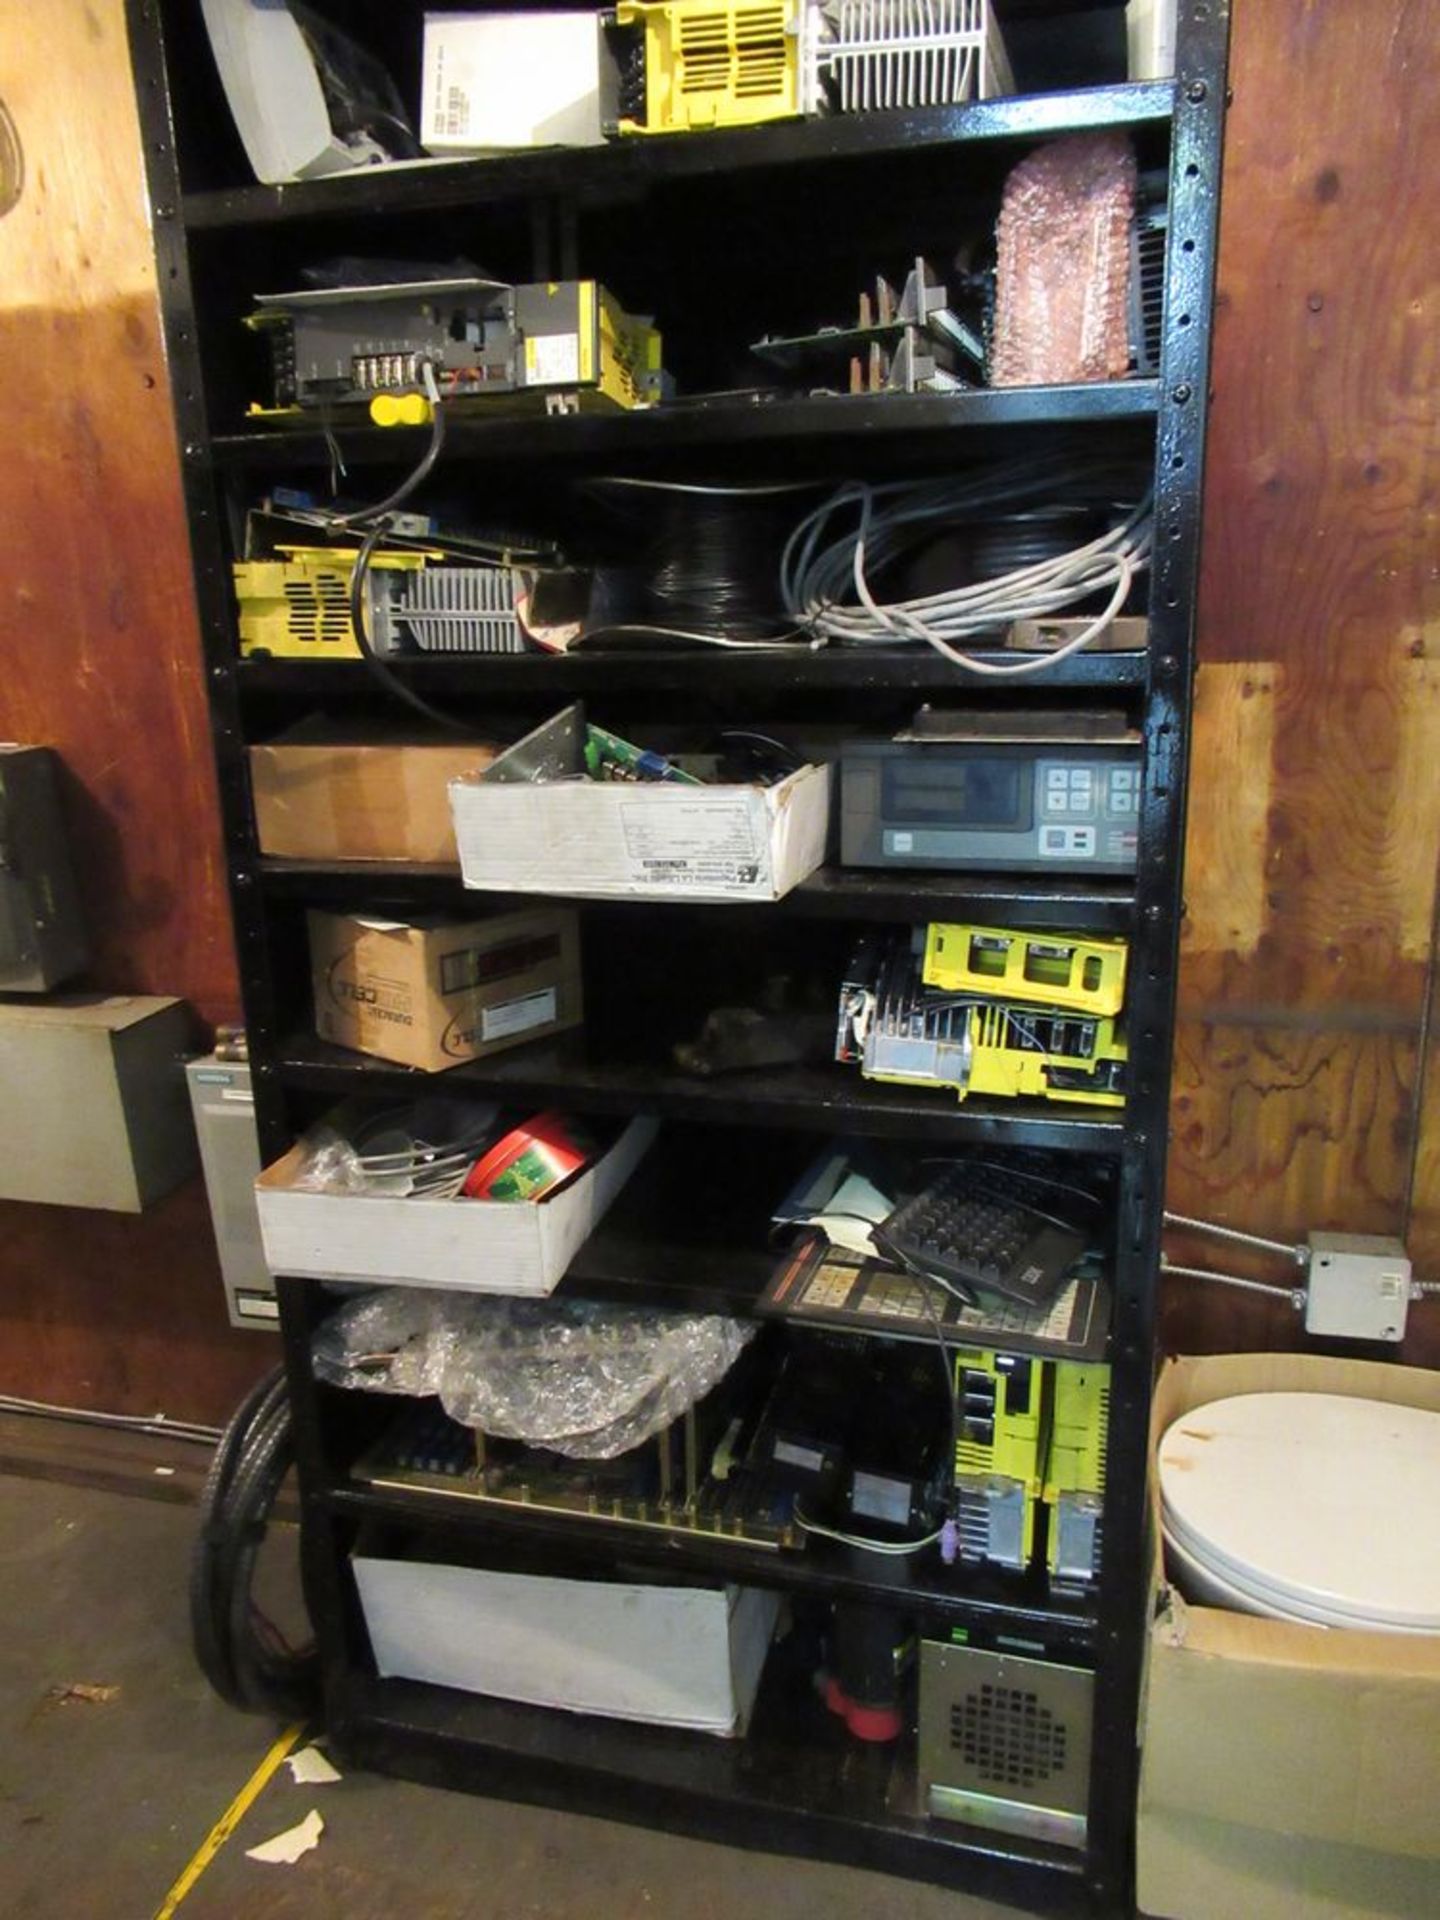 Contents Of Office Upstairs 3 Desks, File Cabinets, Bookshelf, Rack w/ Electronics - Image 3 of 4